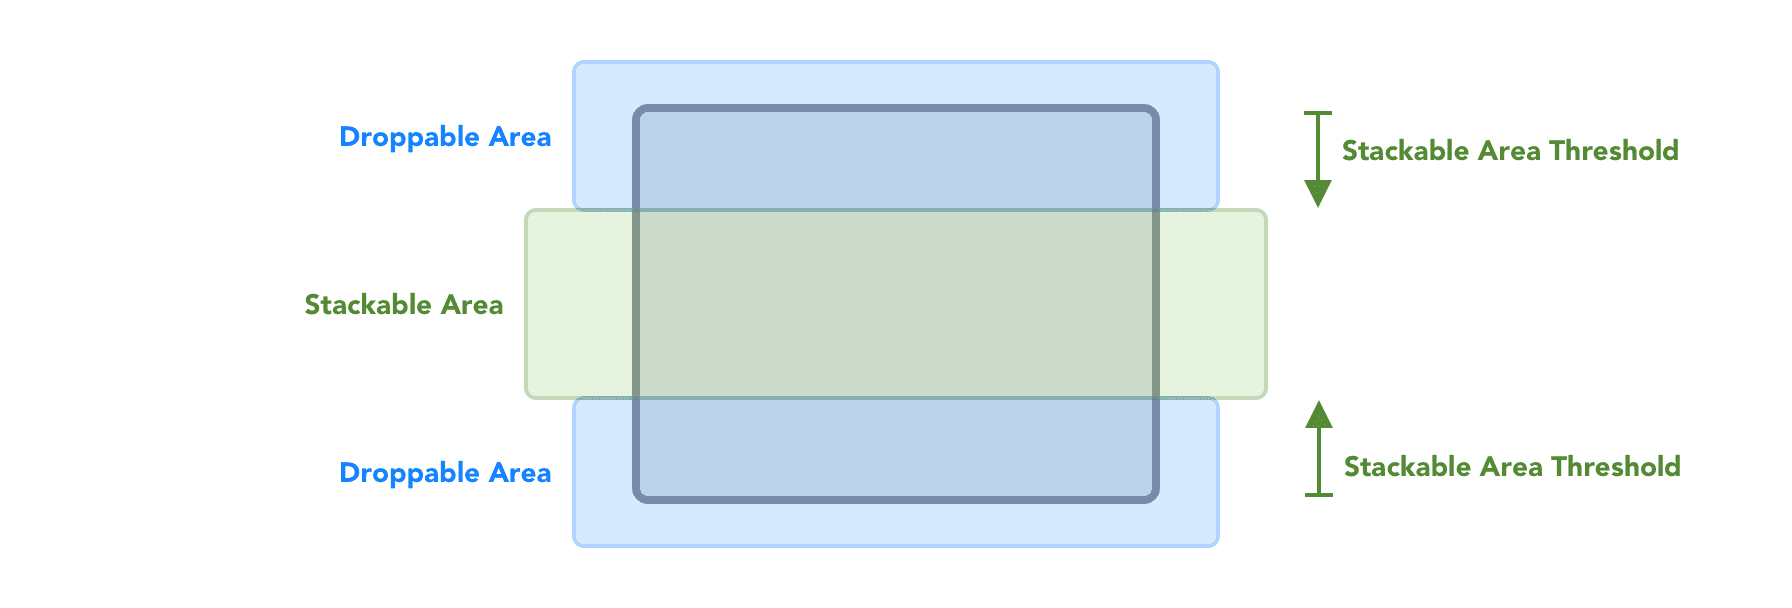 Stackable Area Threshold